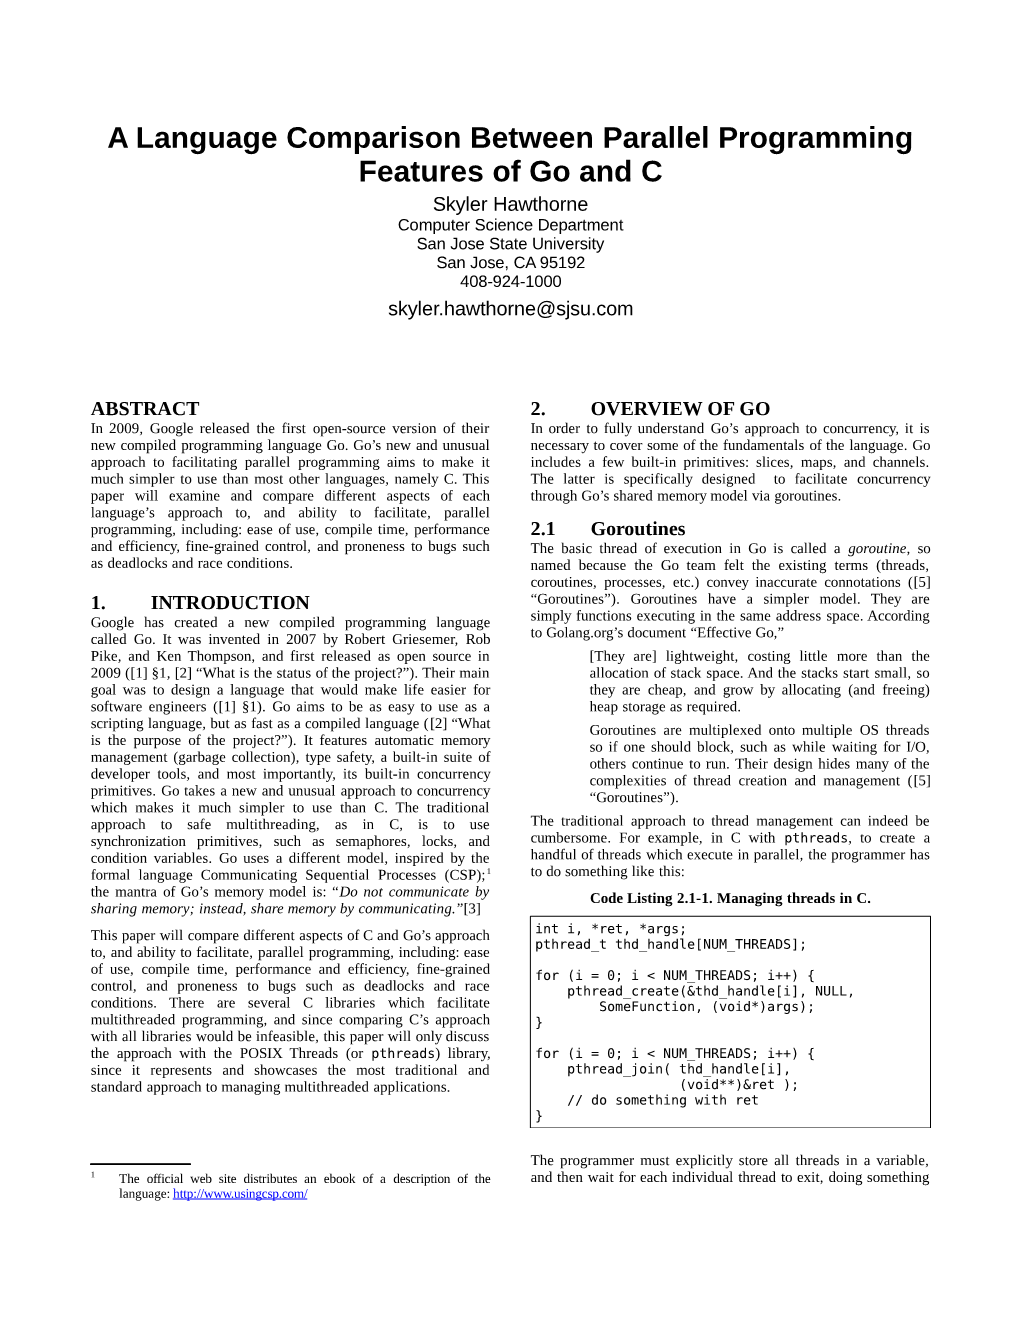 A Language Comparison Between Parallel Programming Features of Go and C Skyler Hawthorne Computer Science Department San Jose State University San Jose, CA 95192